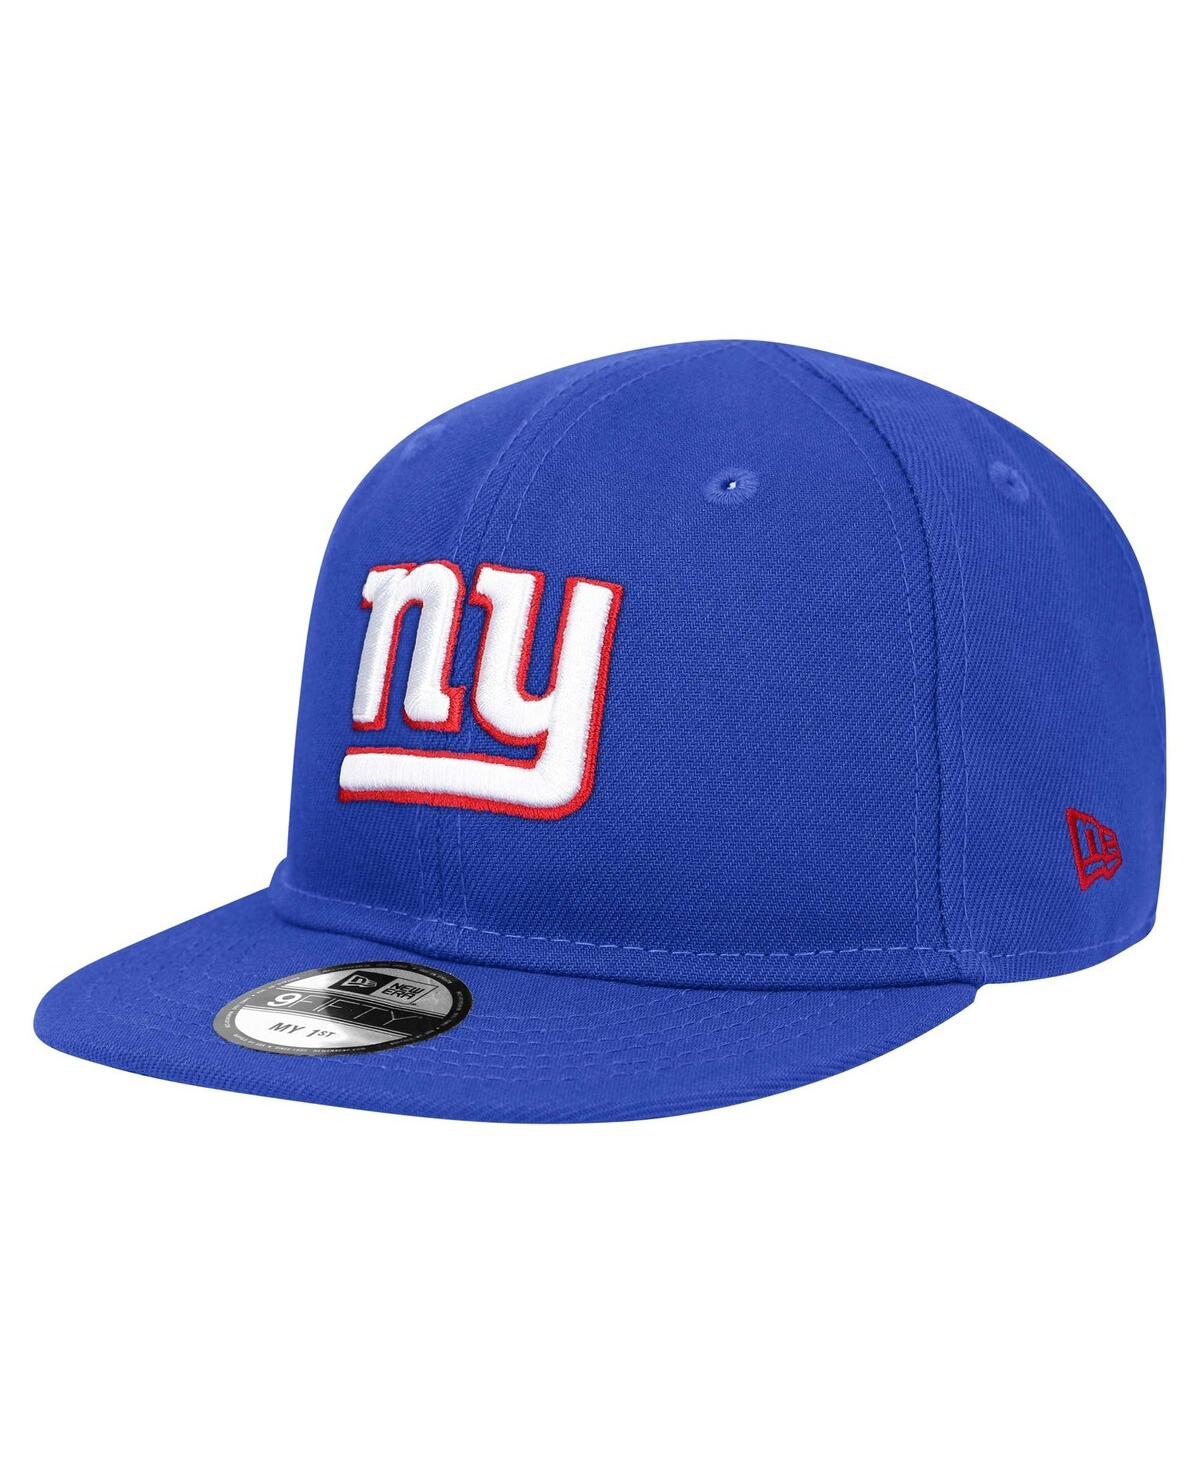 New Era Baby Boys And Girls  Royal New York Giants My 1st 9fifty Adjustable Hat